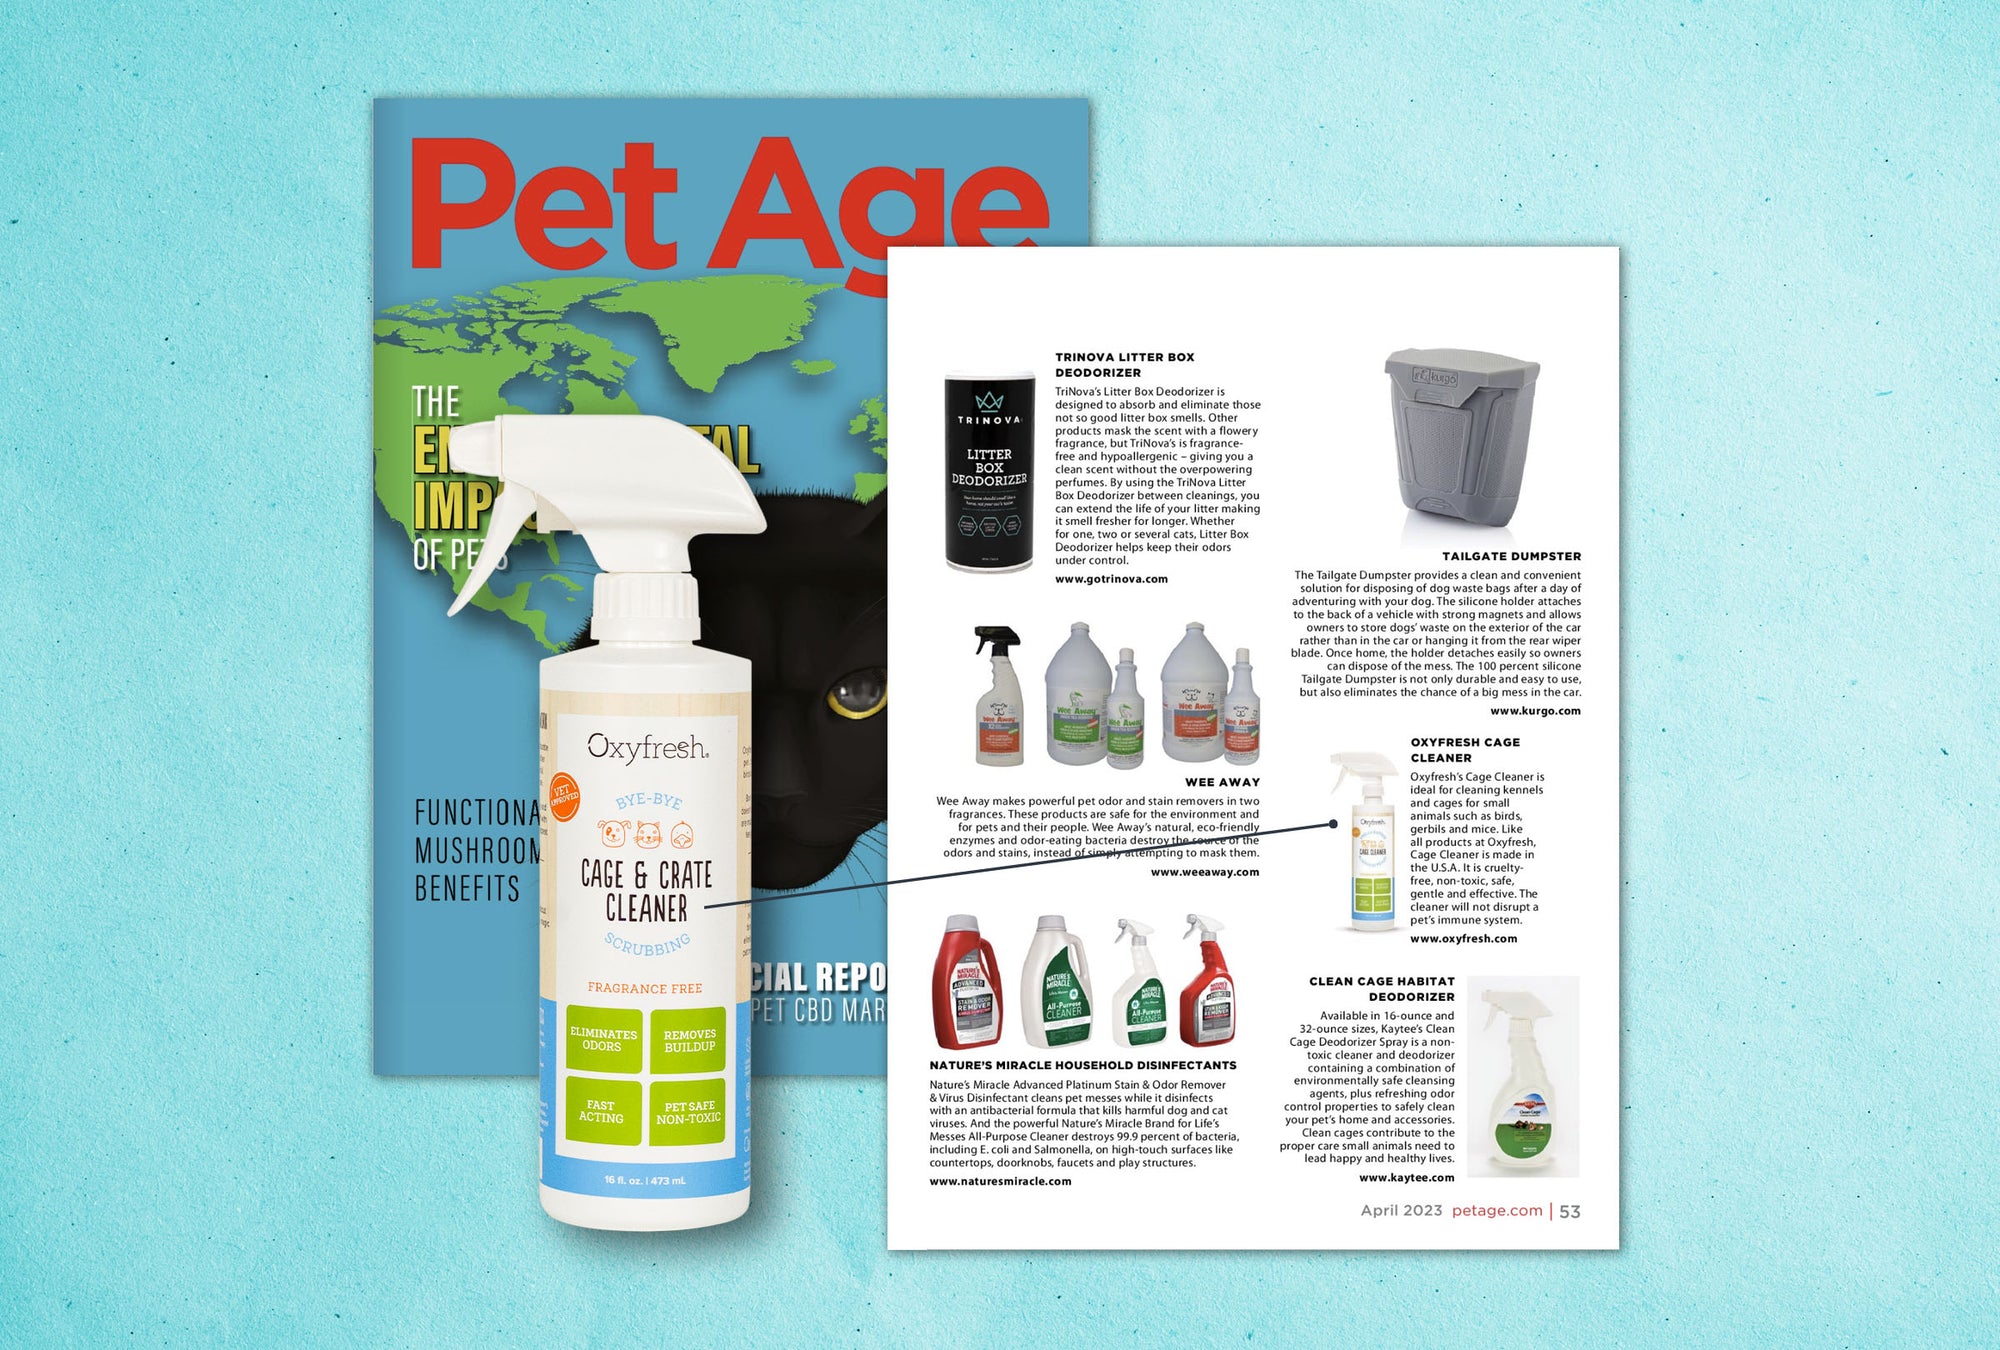 Oxyfresh Cage & Crate Cleaner Featured in the April 2023 Edition of Pet Age Magazine